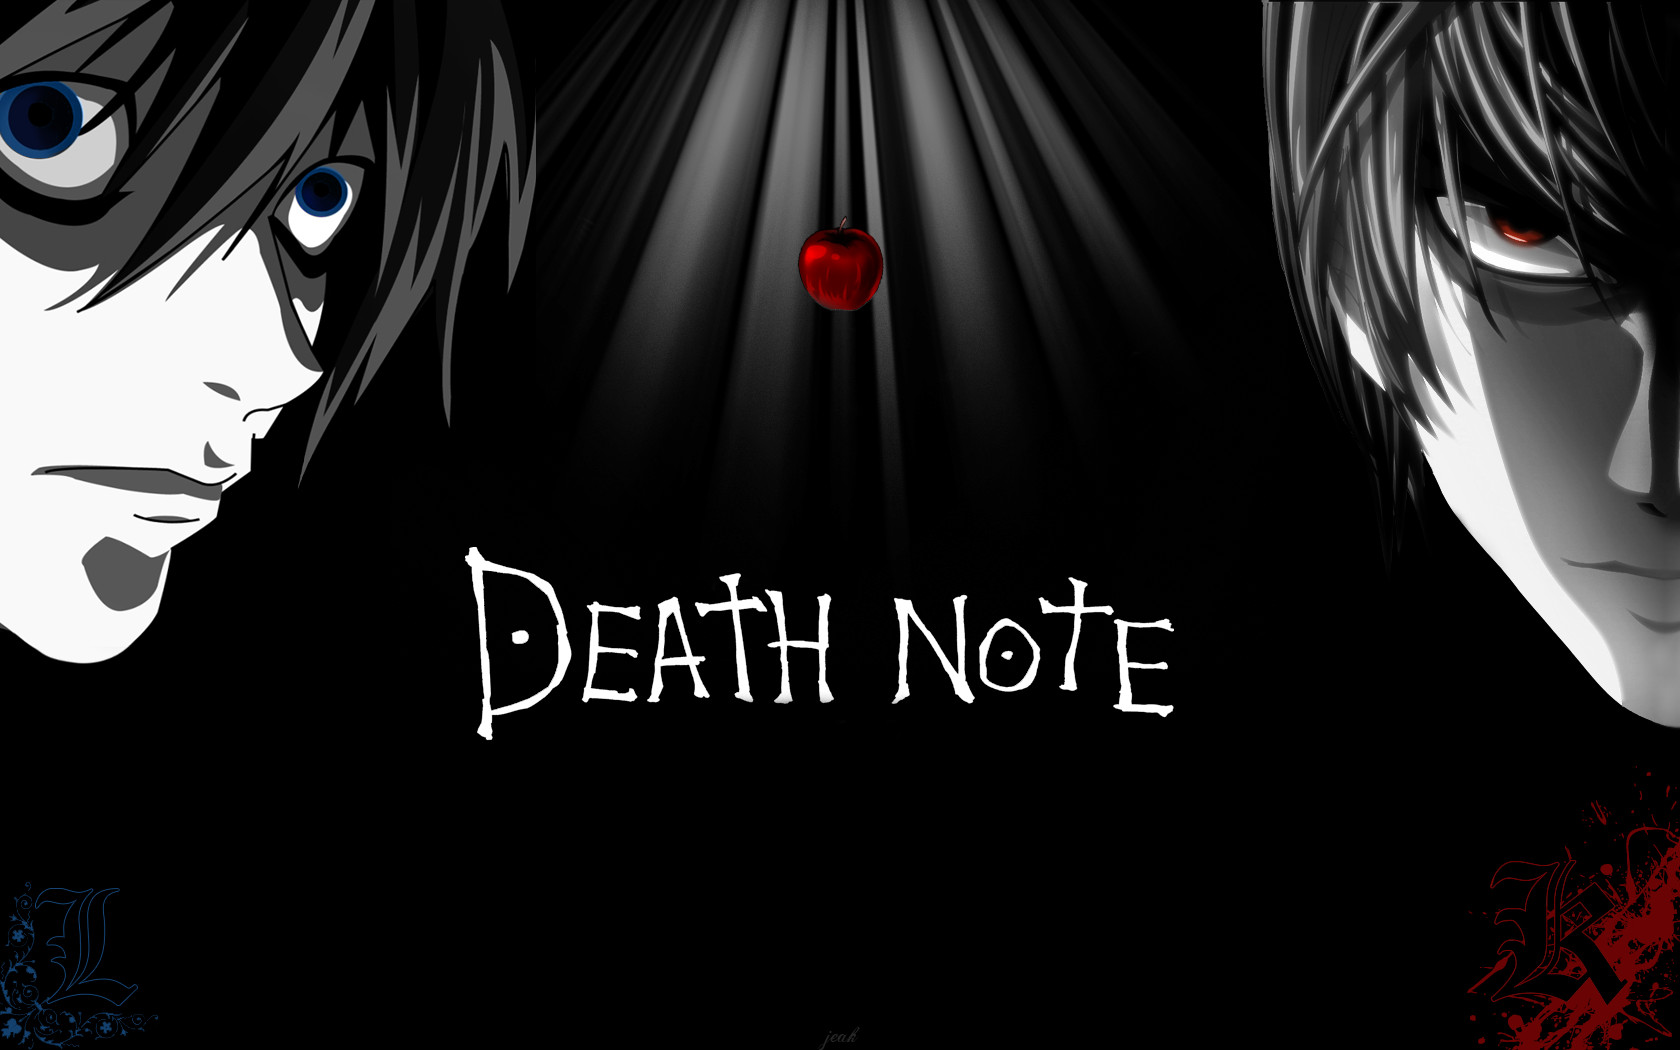 Death Note Res: 1680x1050 / Size:203kb. Views: 372862